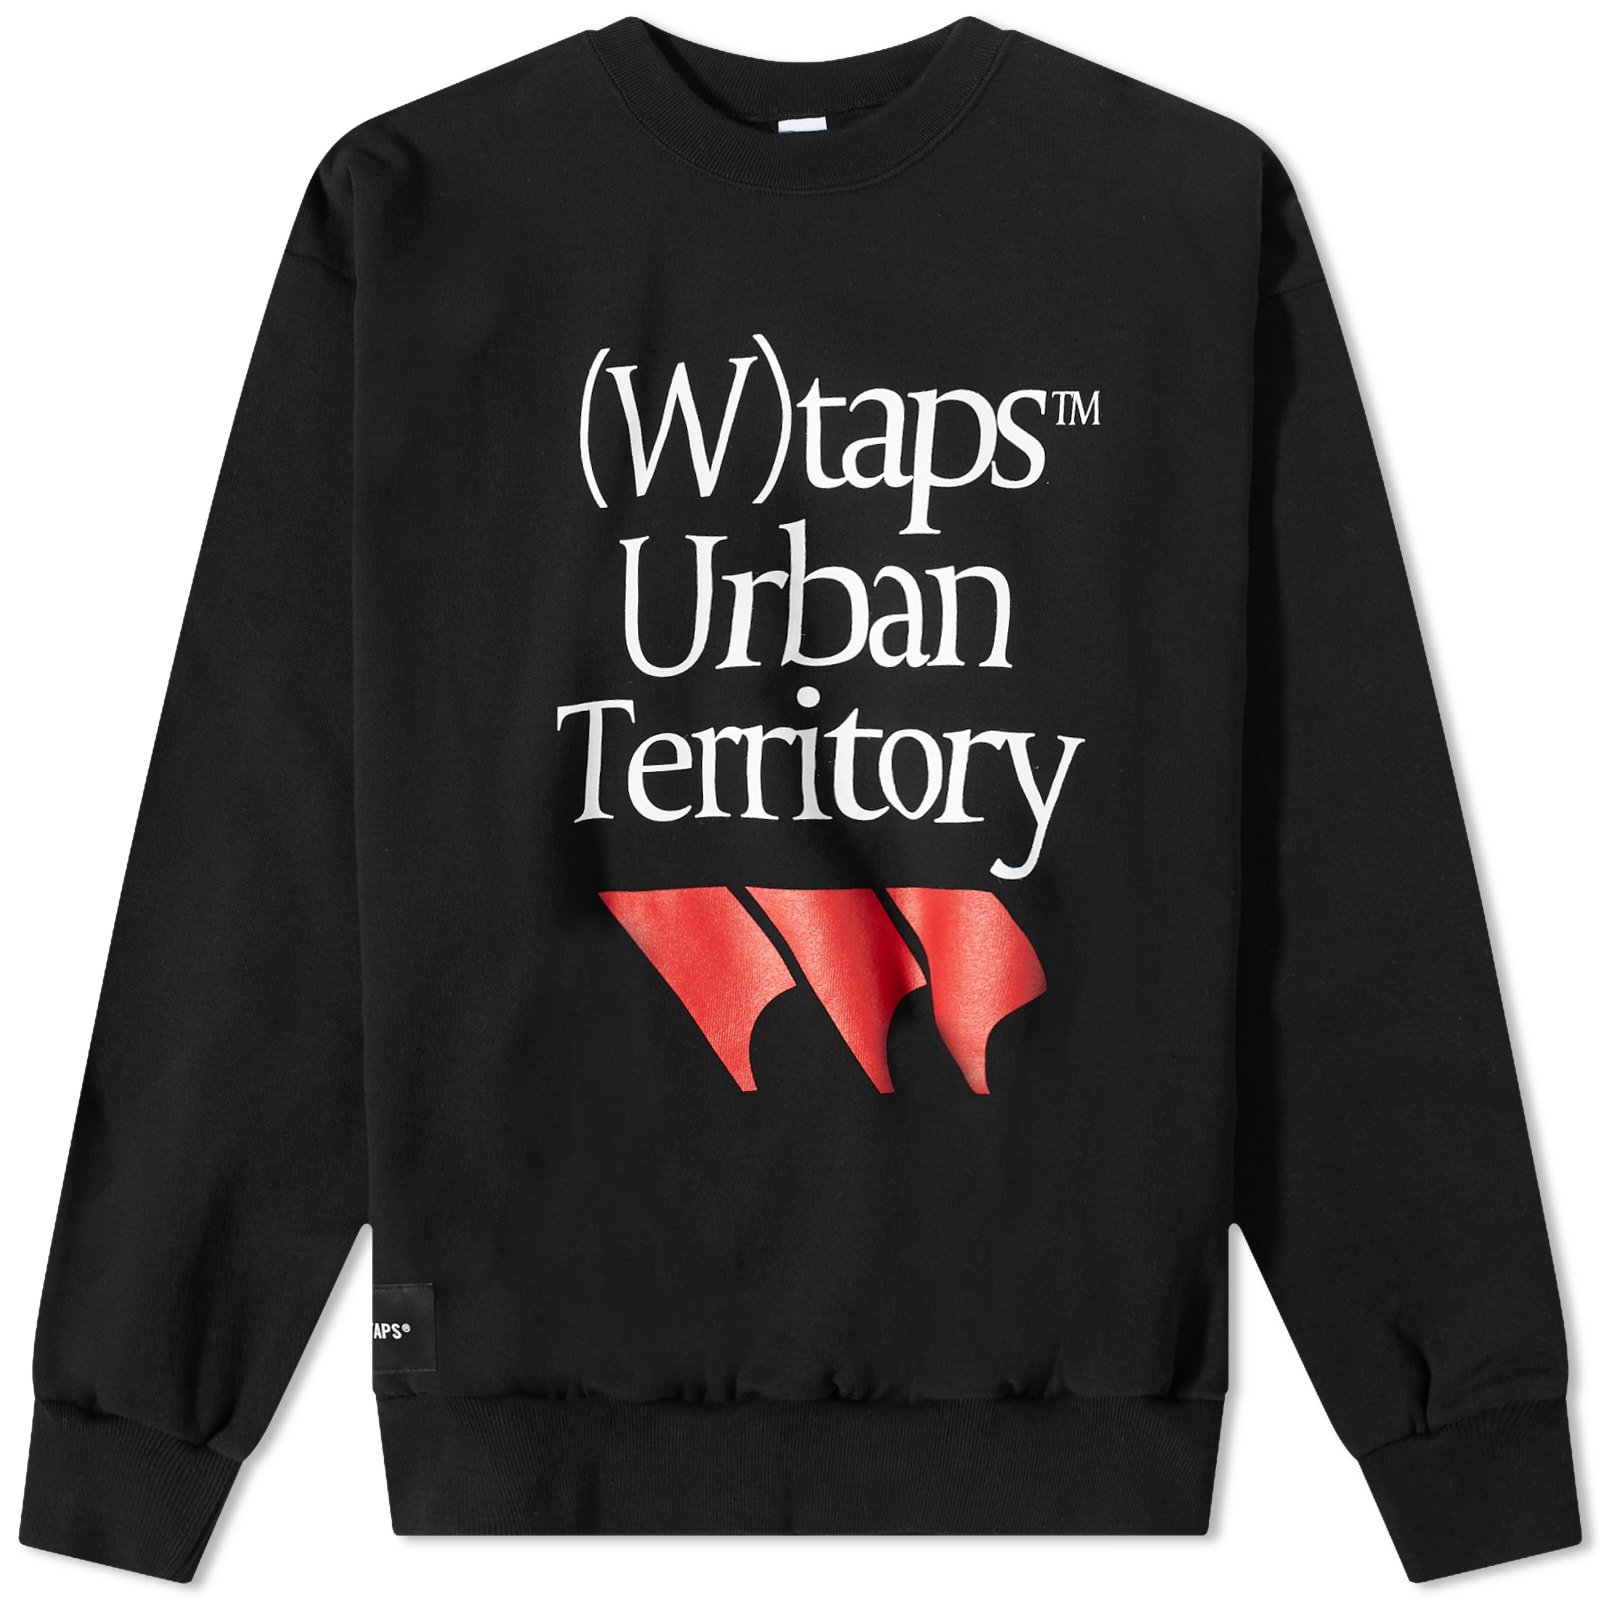 22aw wtaps VISUAL UPARMORED / HOODY